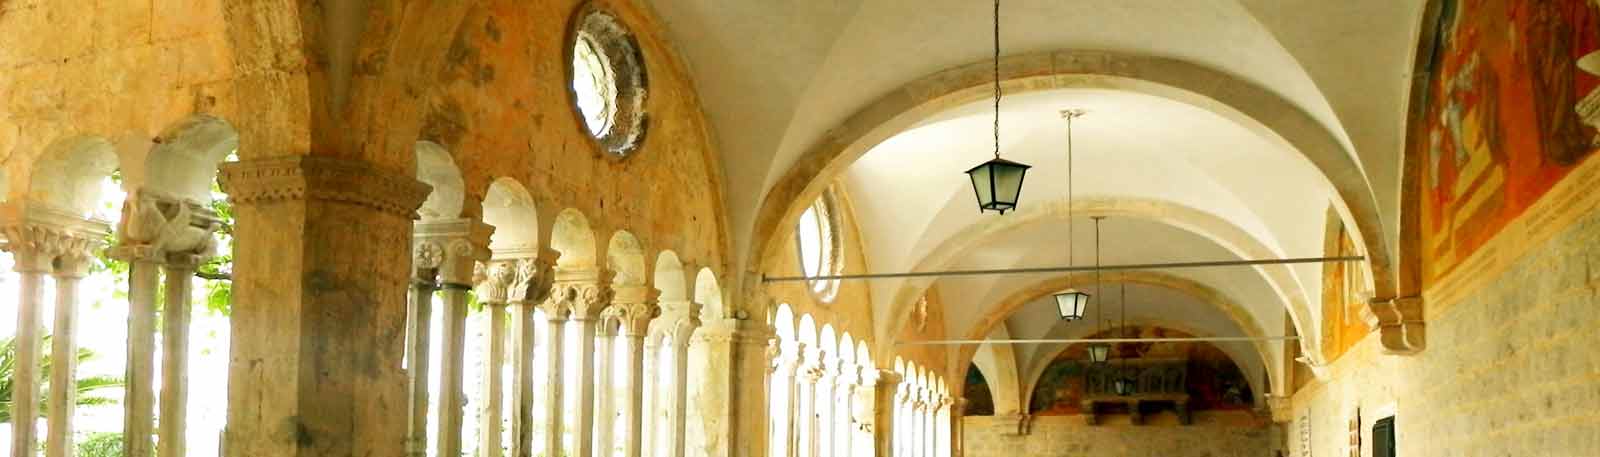 Photo by IQCruising of the Franciscan Cloister  in Dubrovnik cruise port